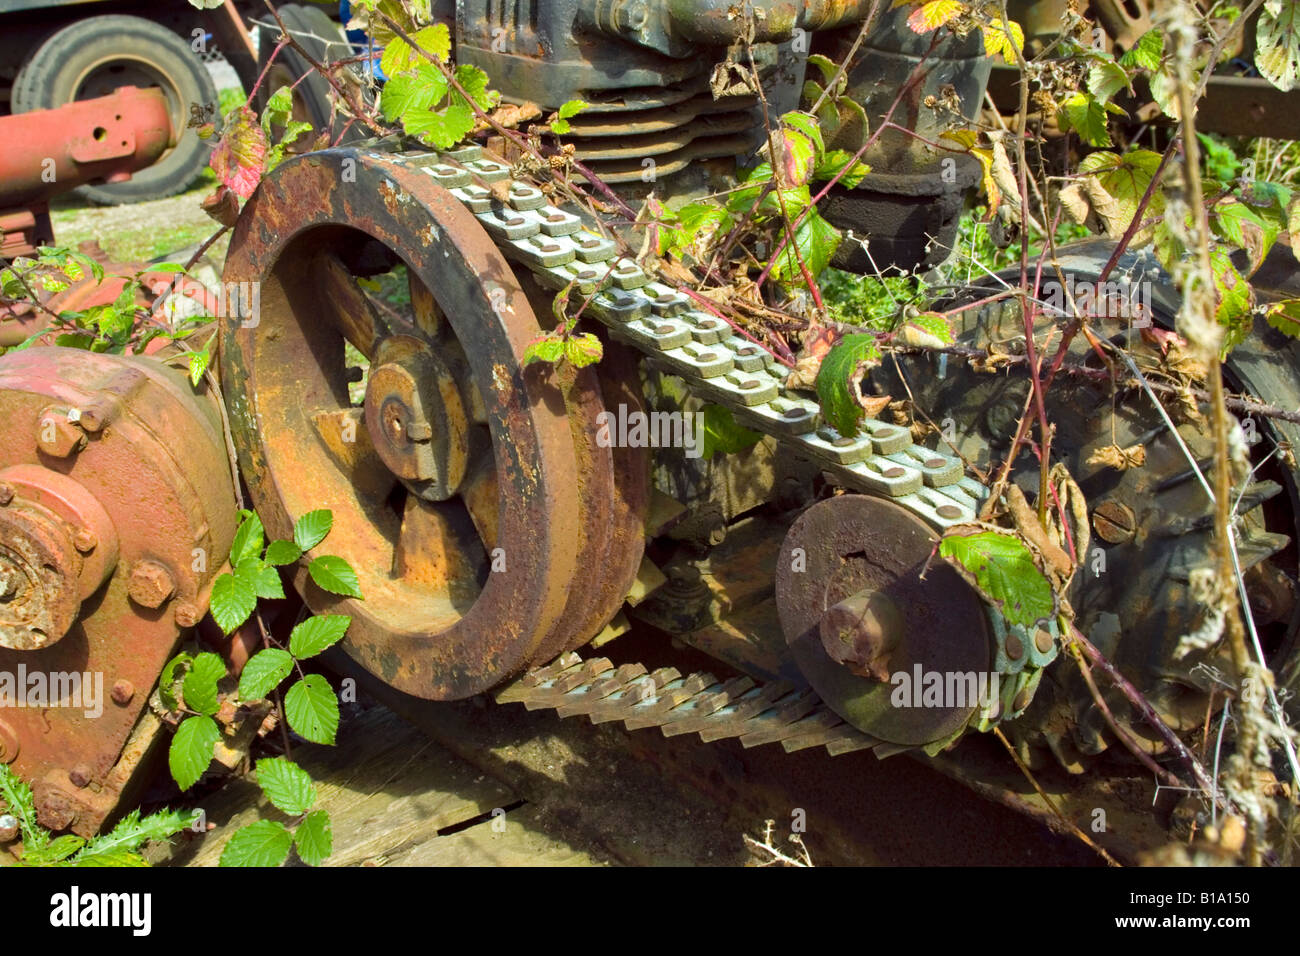 Discarded Machinery. Scrap, Overgrown, Stock Photo